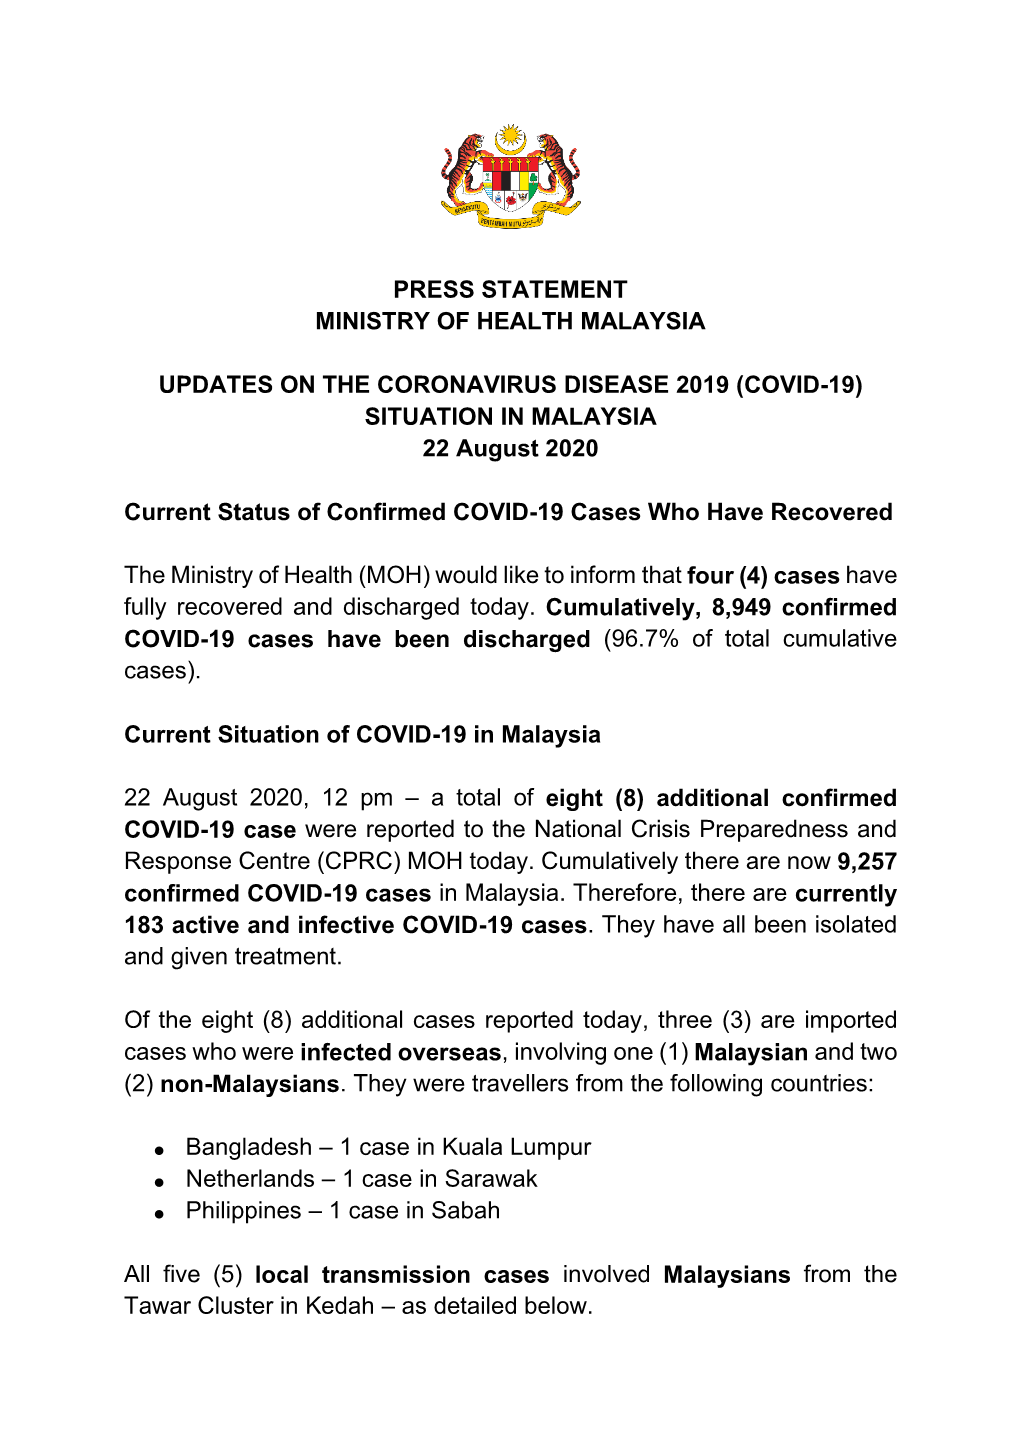 PRESS STATEMENT MINISTRY of HEALTH MALAYSIA UPDATES on the CORONAVIRUS DISEASE 2019 (COVID-19) SITUATION in MALAYSIA 22 August